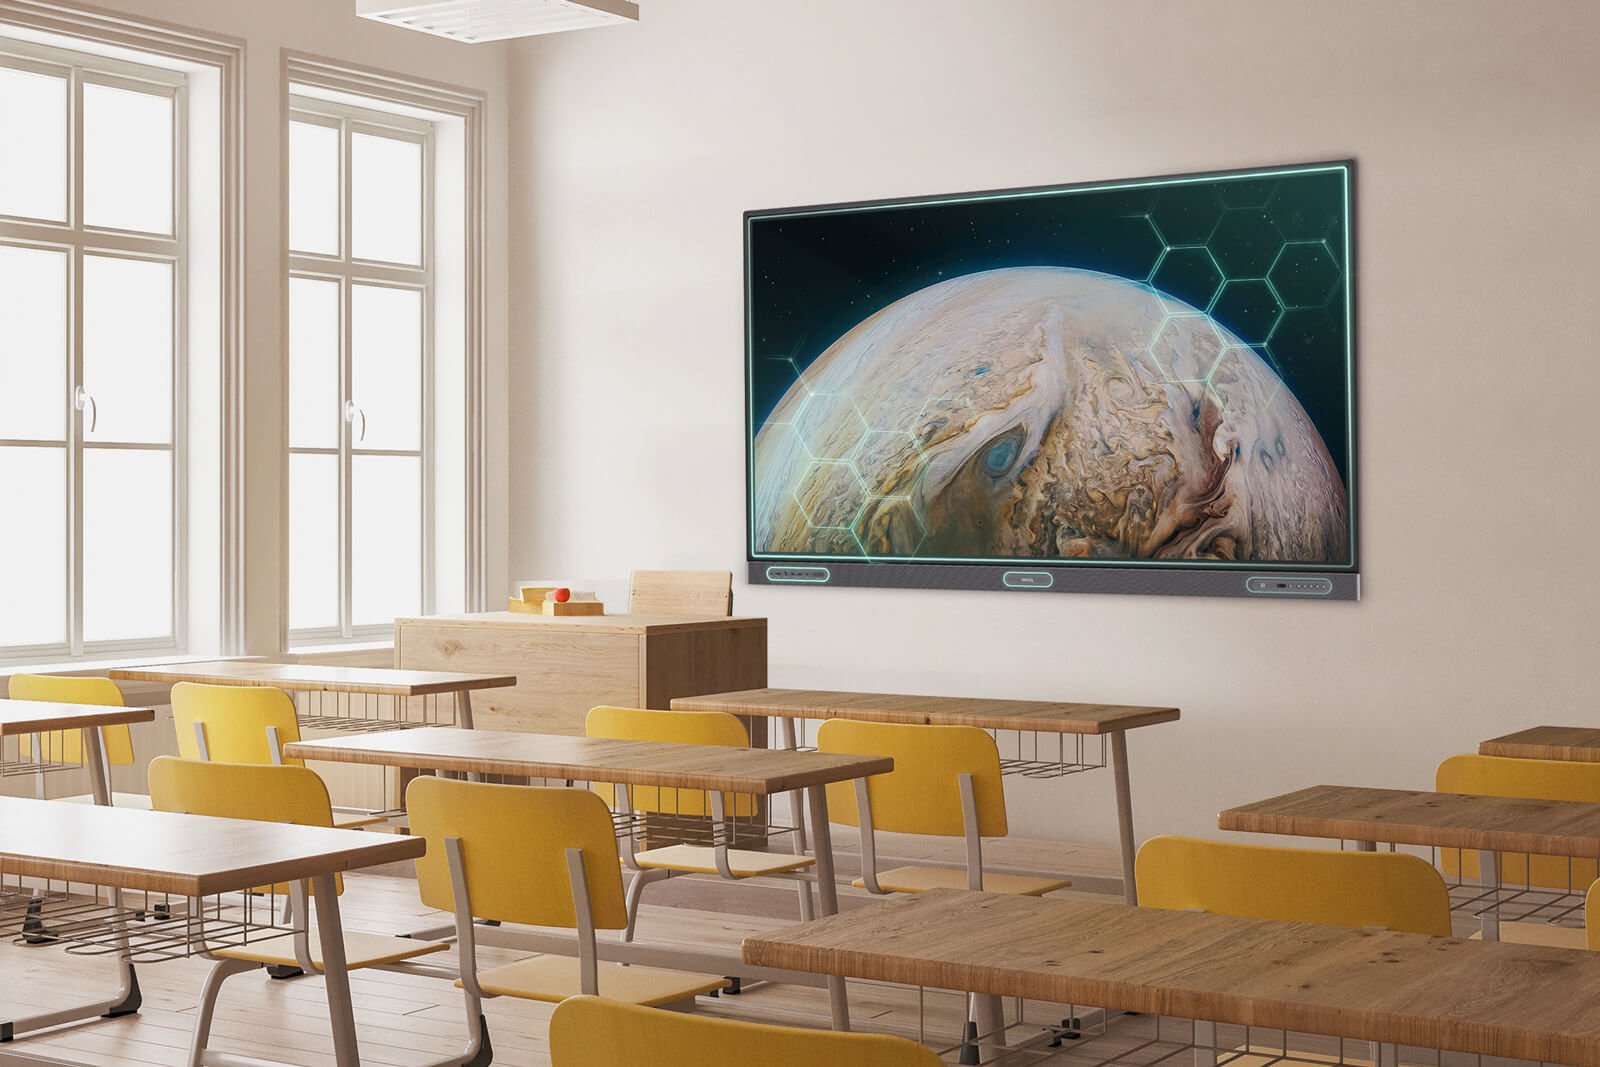 Germ-resistant Pro Series RP03 screen in a bright, empty classroom